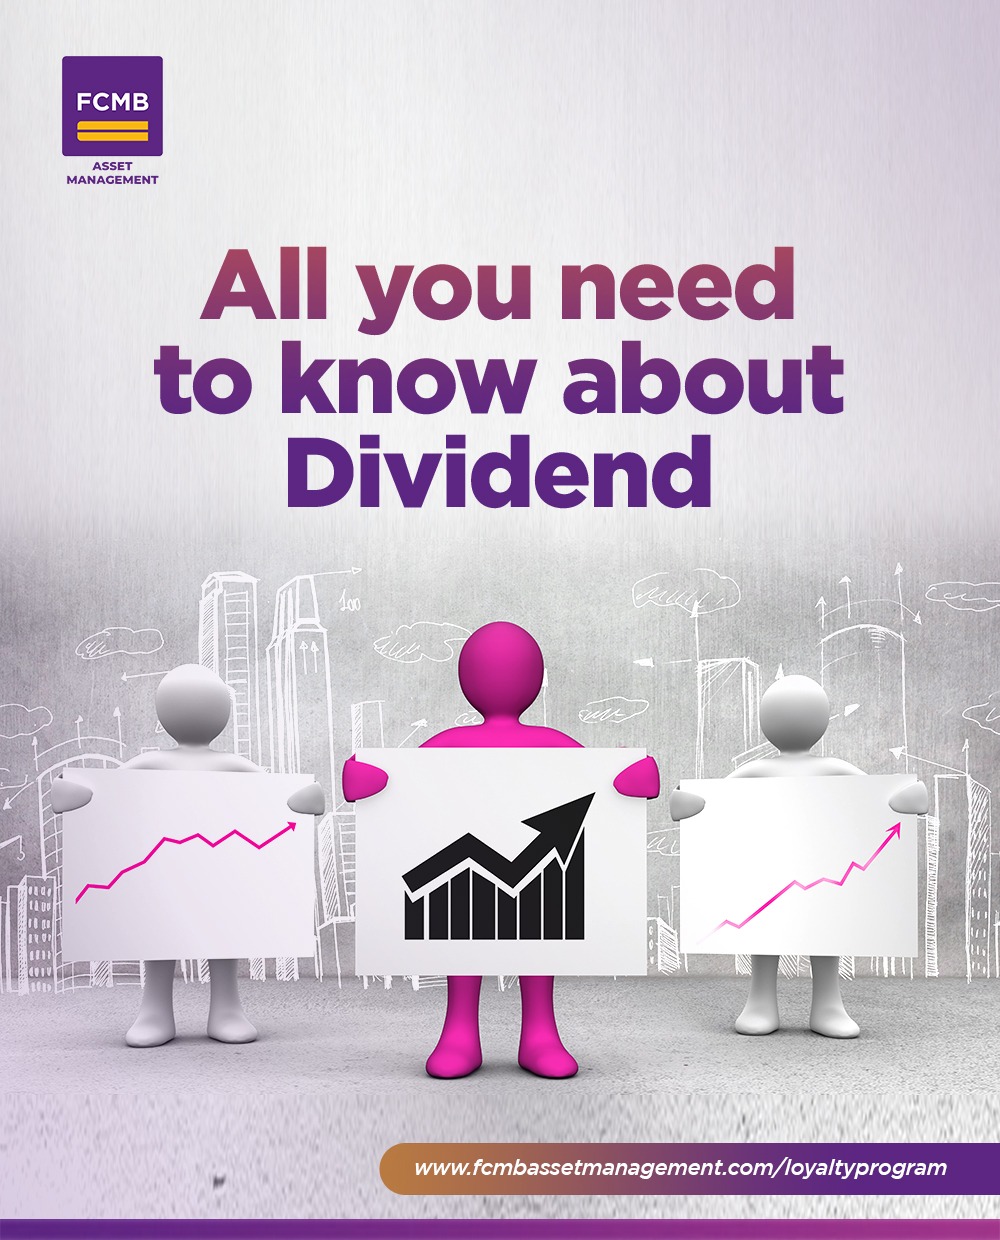 All you need to know about Dividend